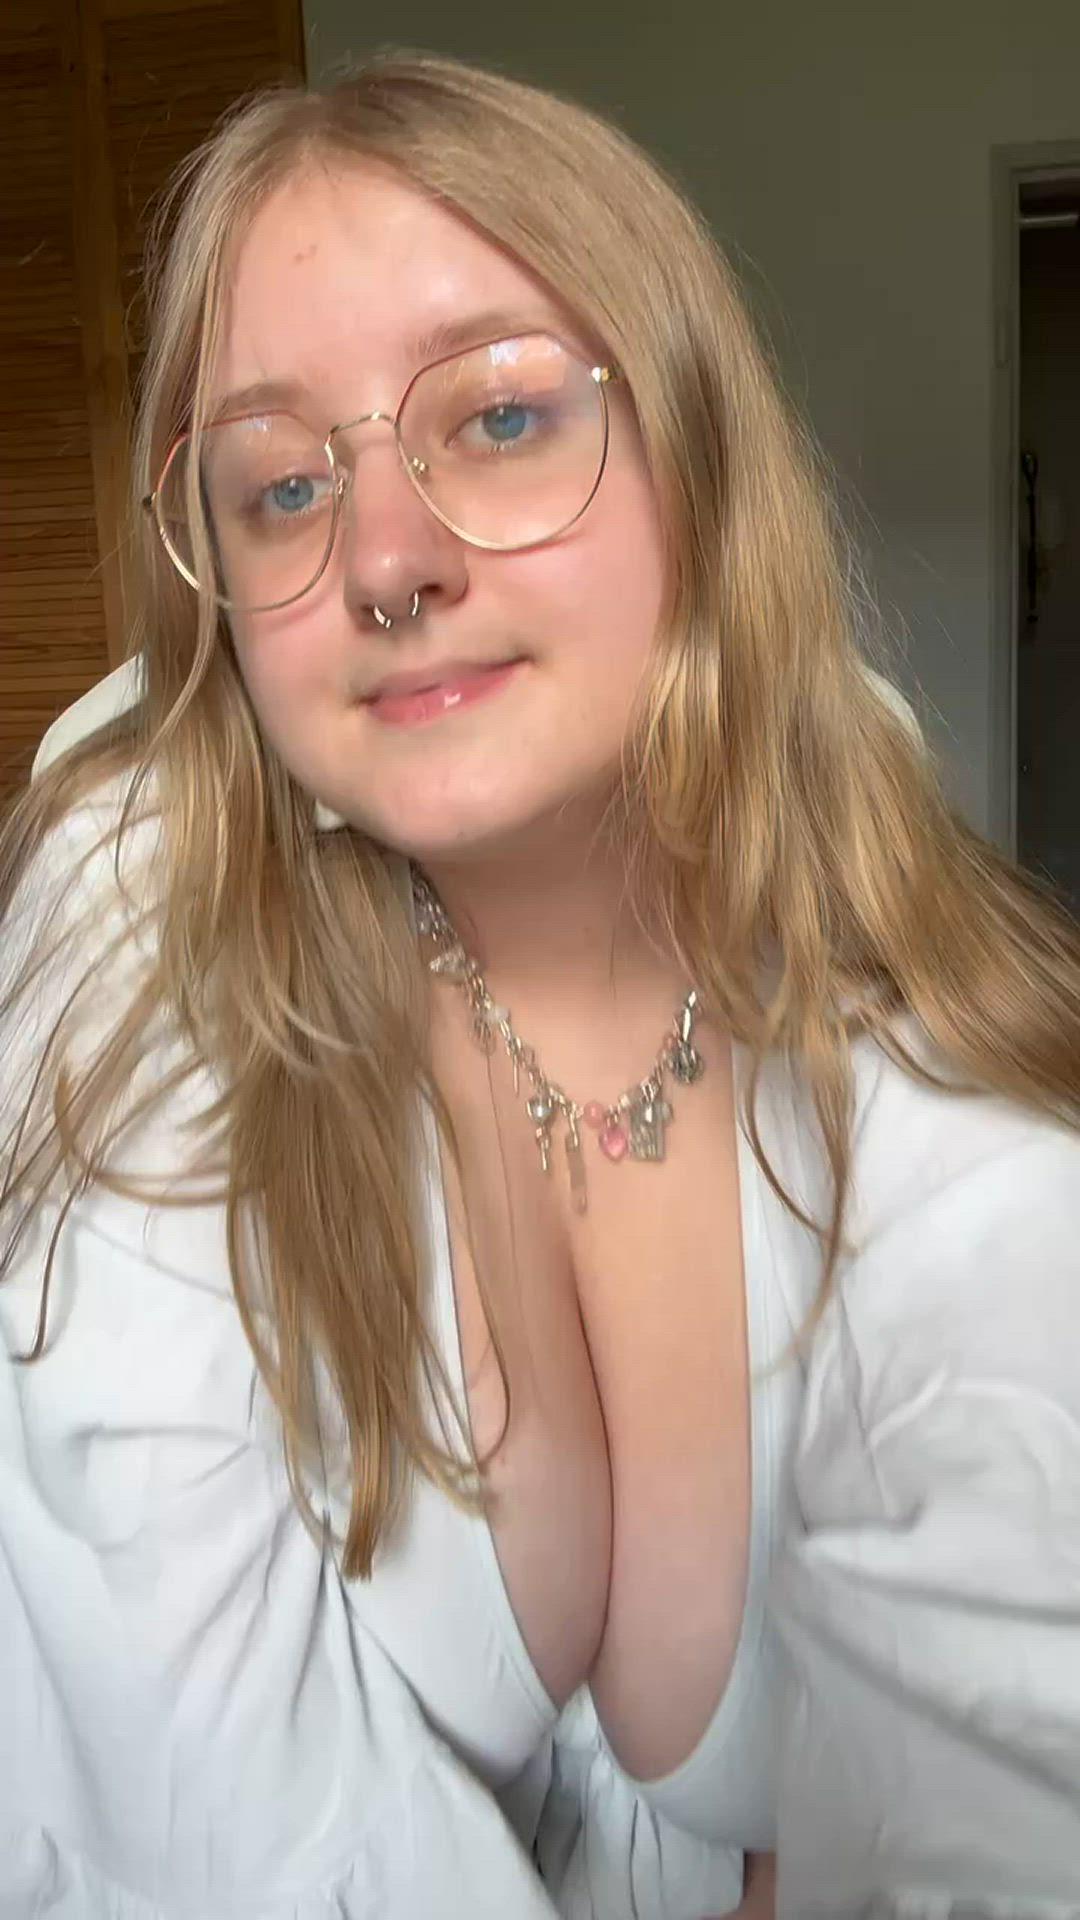 Big Tits porn video with onlyfans model thiccangel <strong>@thiccangel69</strong>